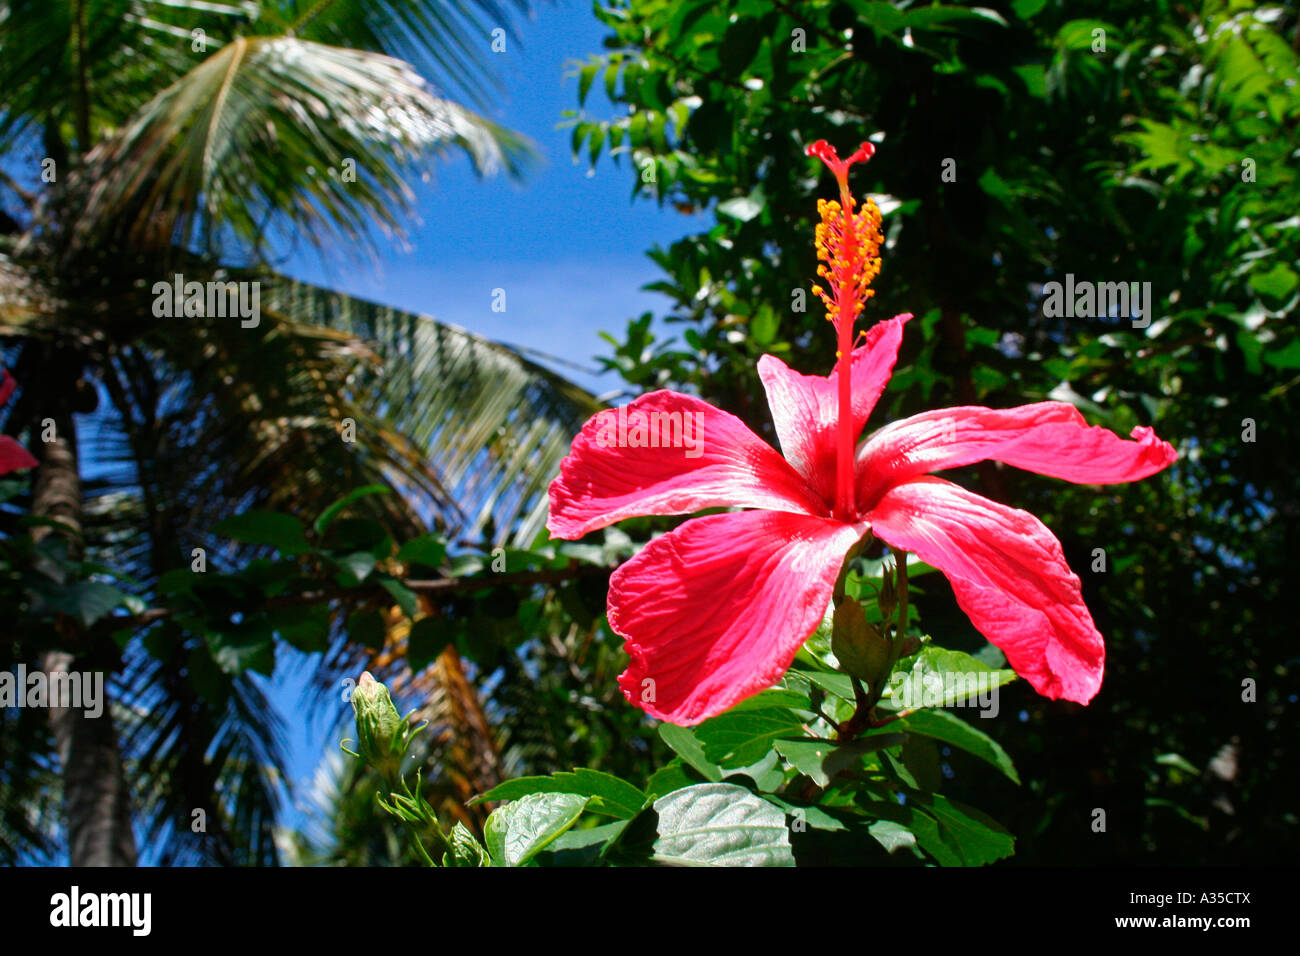 Hibiscus, a common tropical flower Stock Photo